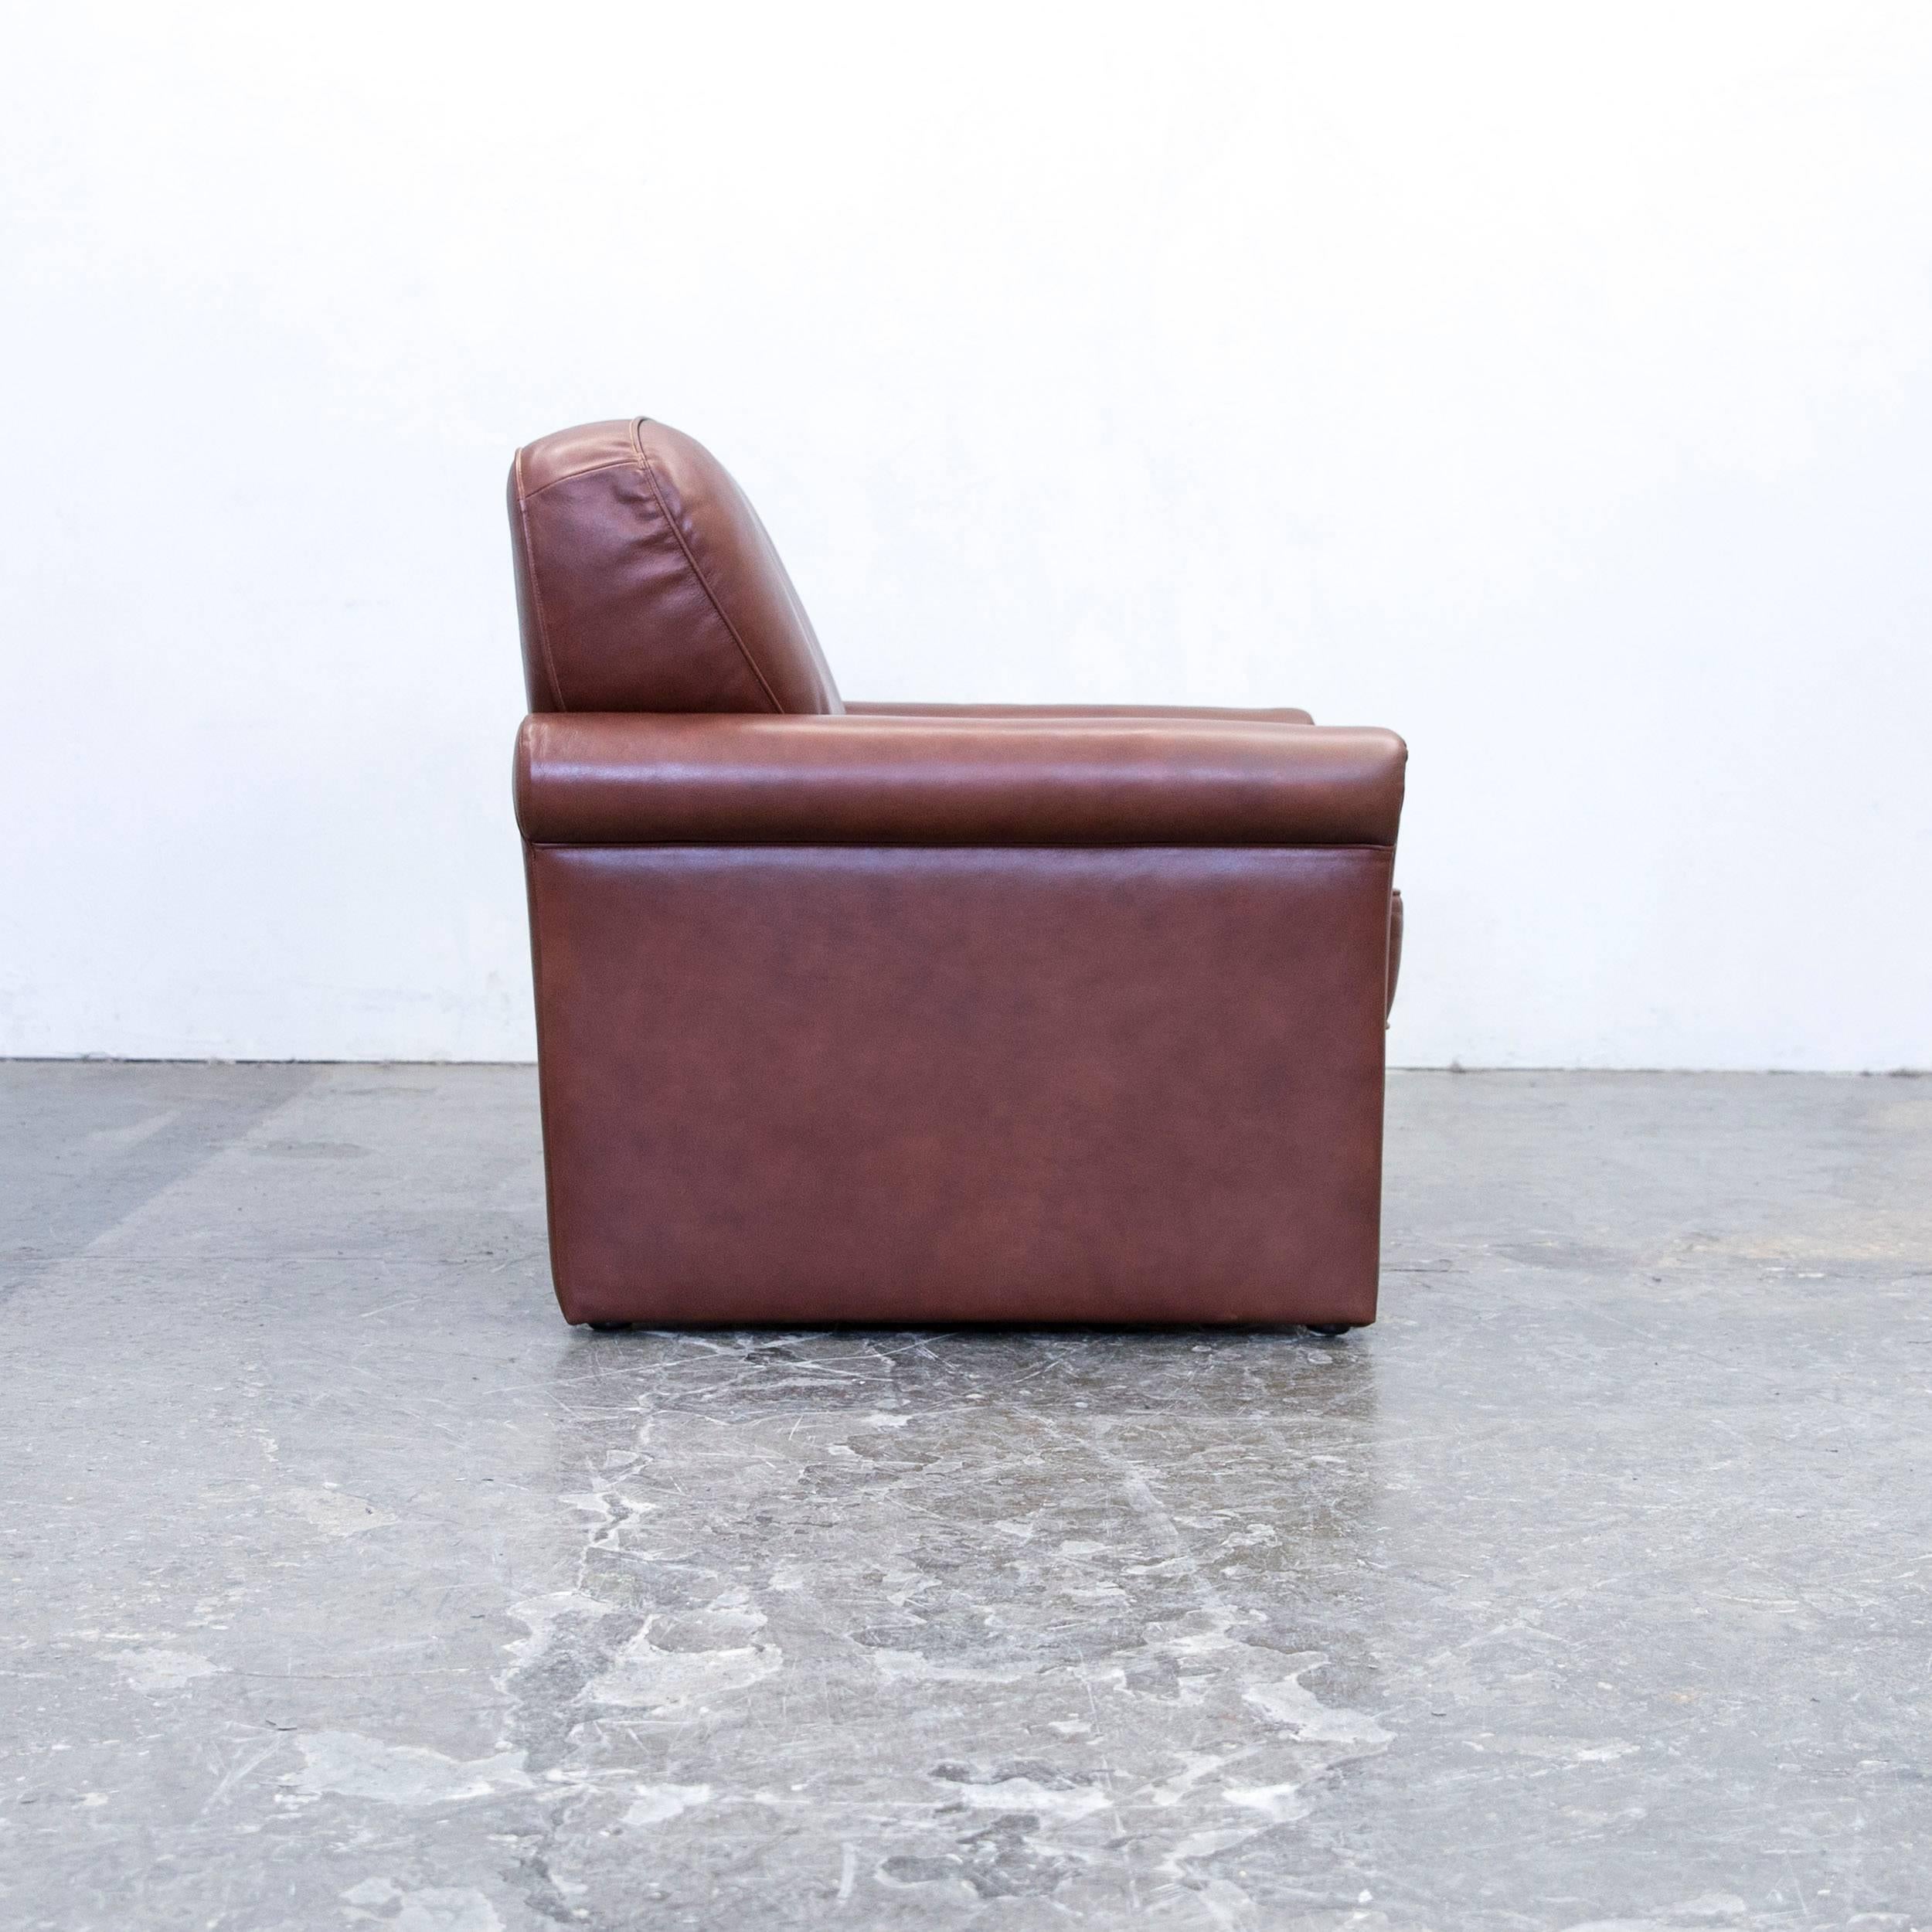 Gepade Akad´or Designer Armchair Leather Brown One-seat Couch Modern 5